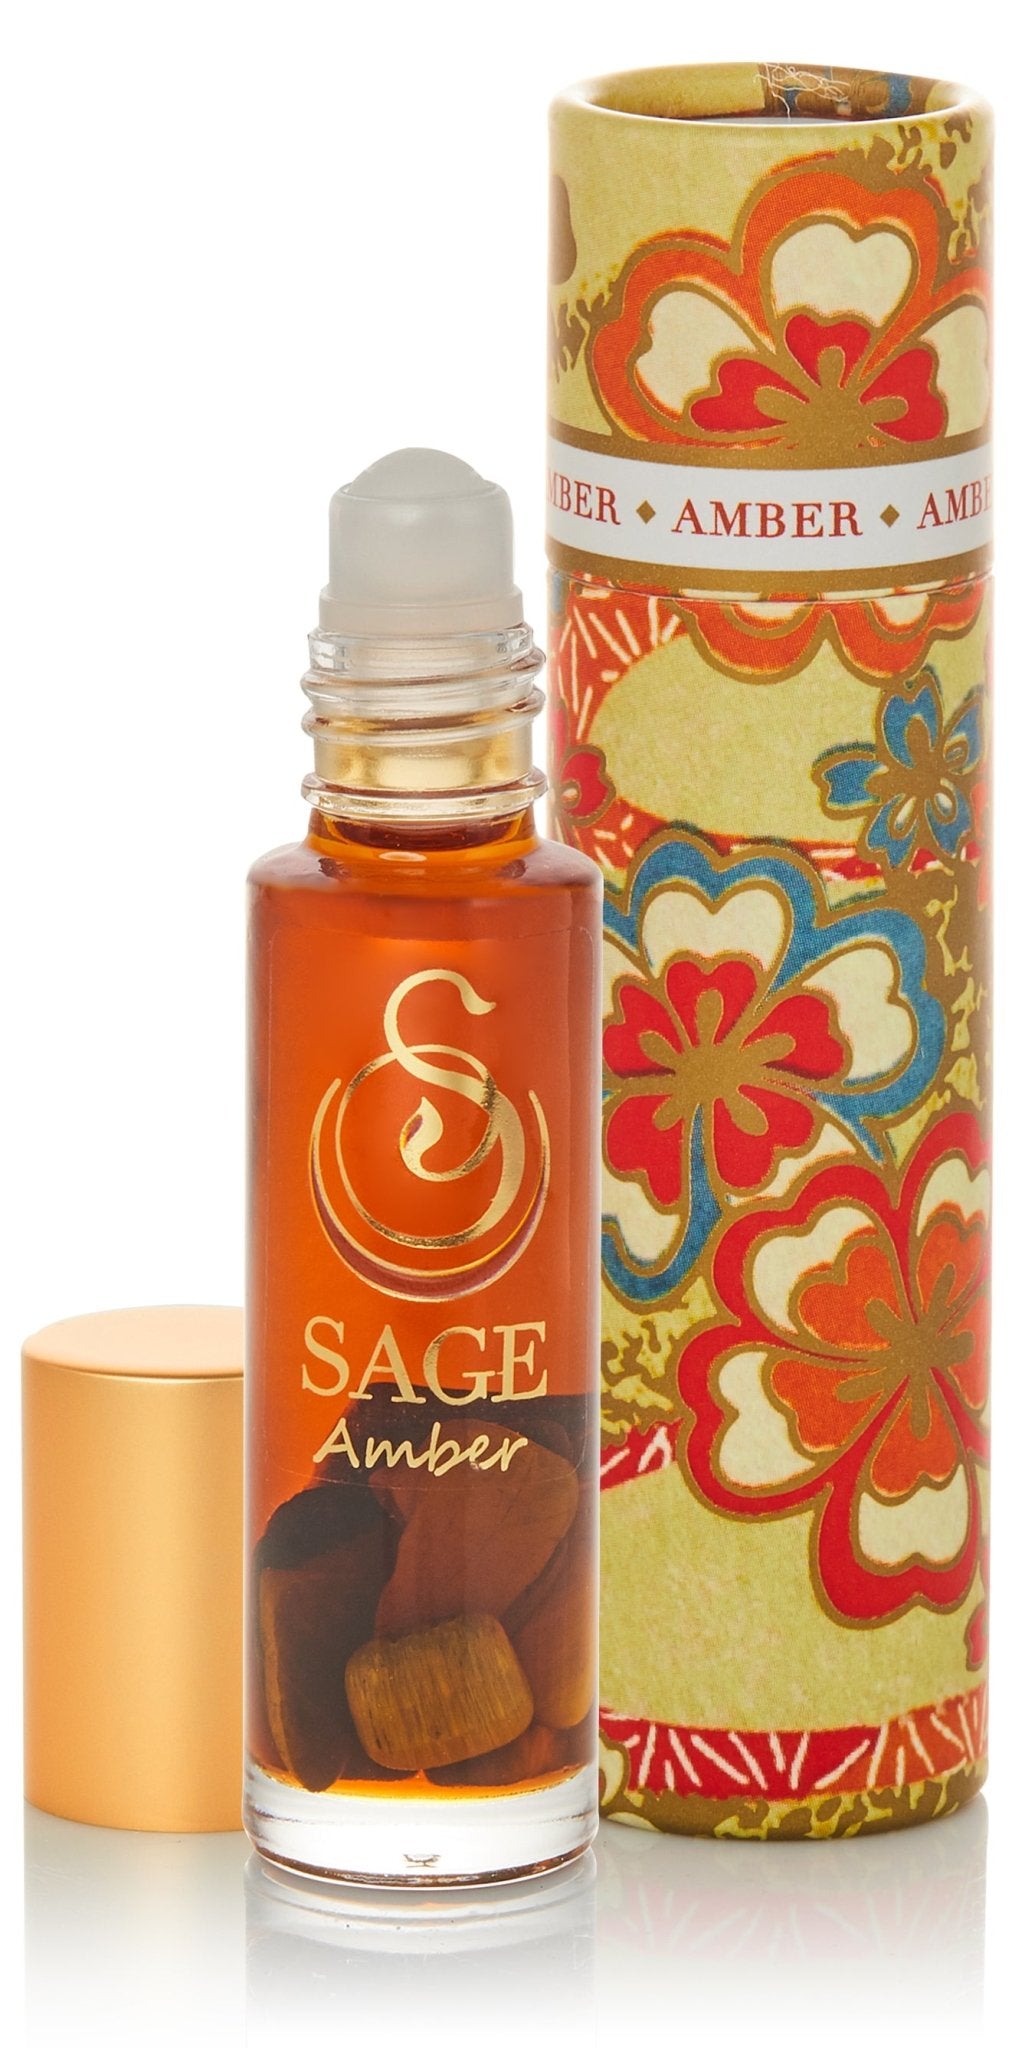 Amber 1/4 oz Gemstone Perfume Oil Concentrate Roll-On by Sage